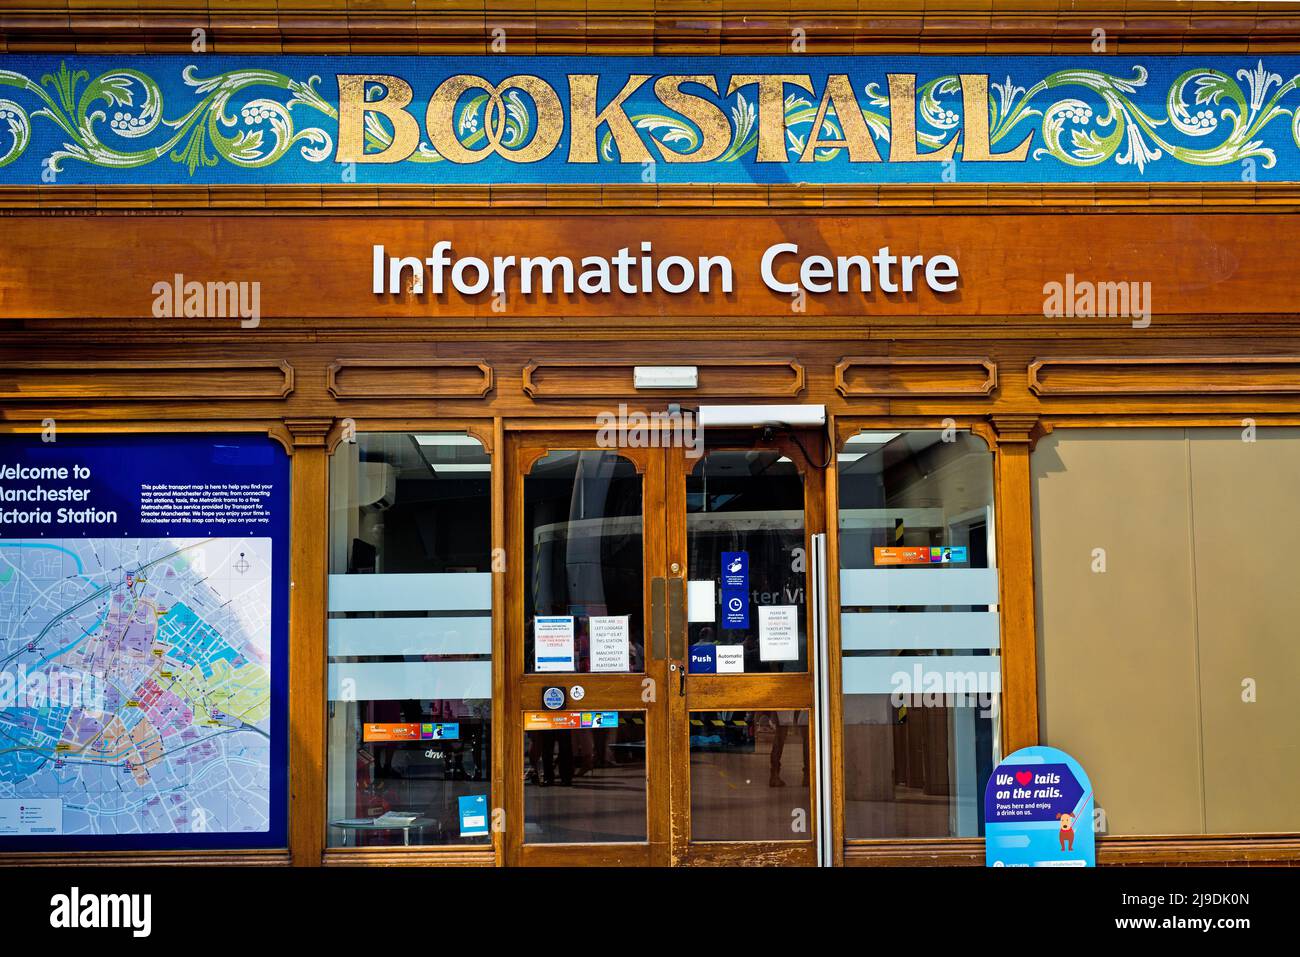 Old Bookstall Sign, Manchester Victoria Railway Station, England Stock Photo